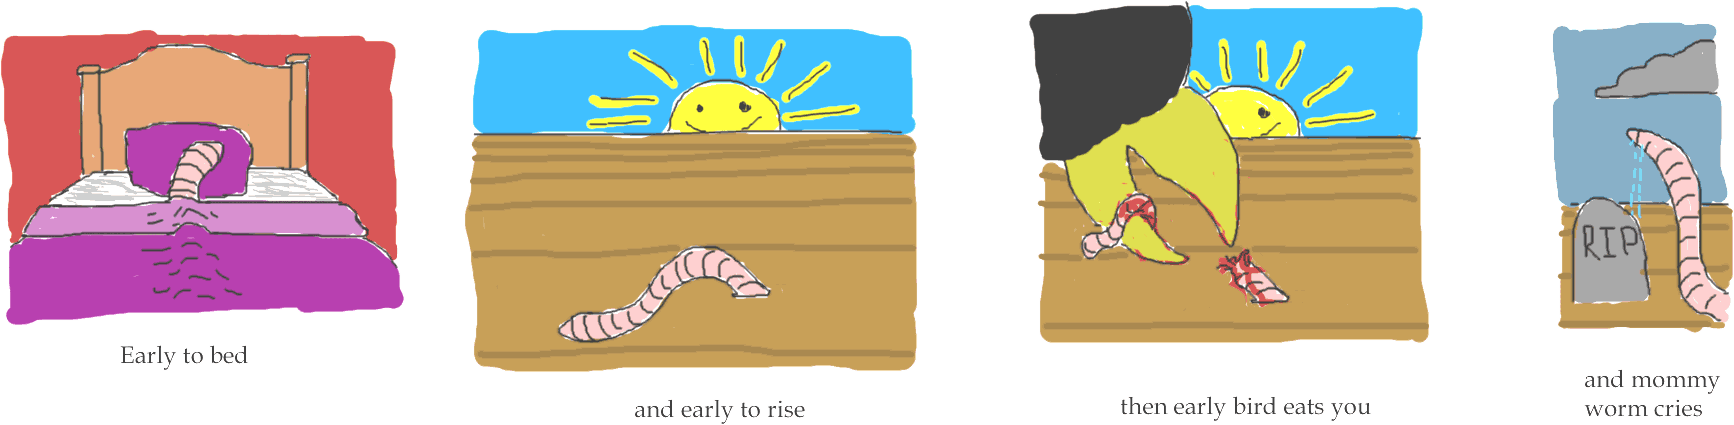 Early Worm